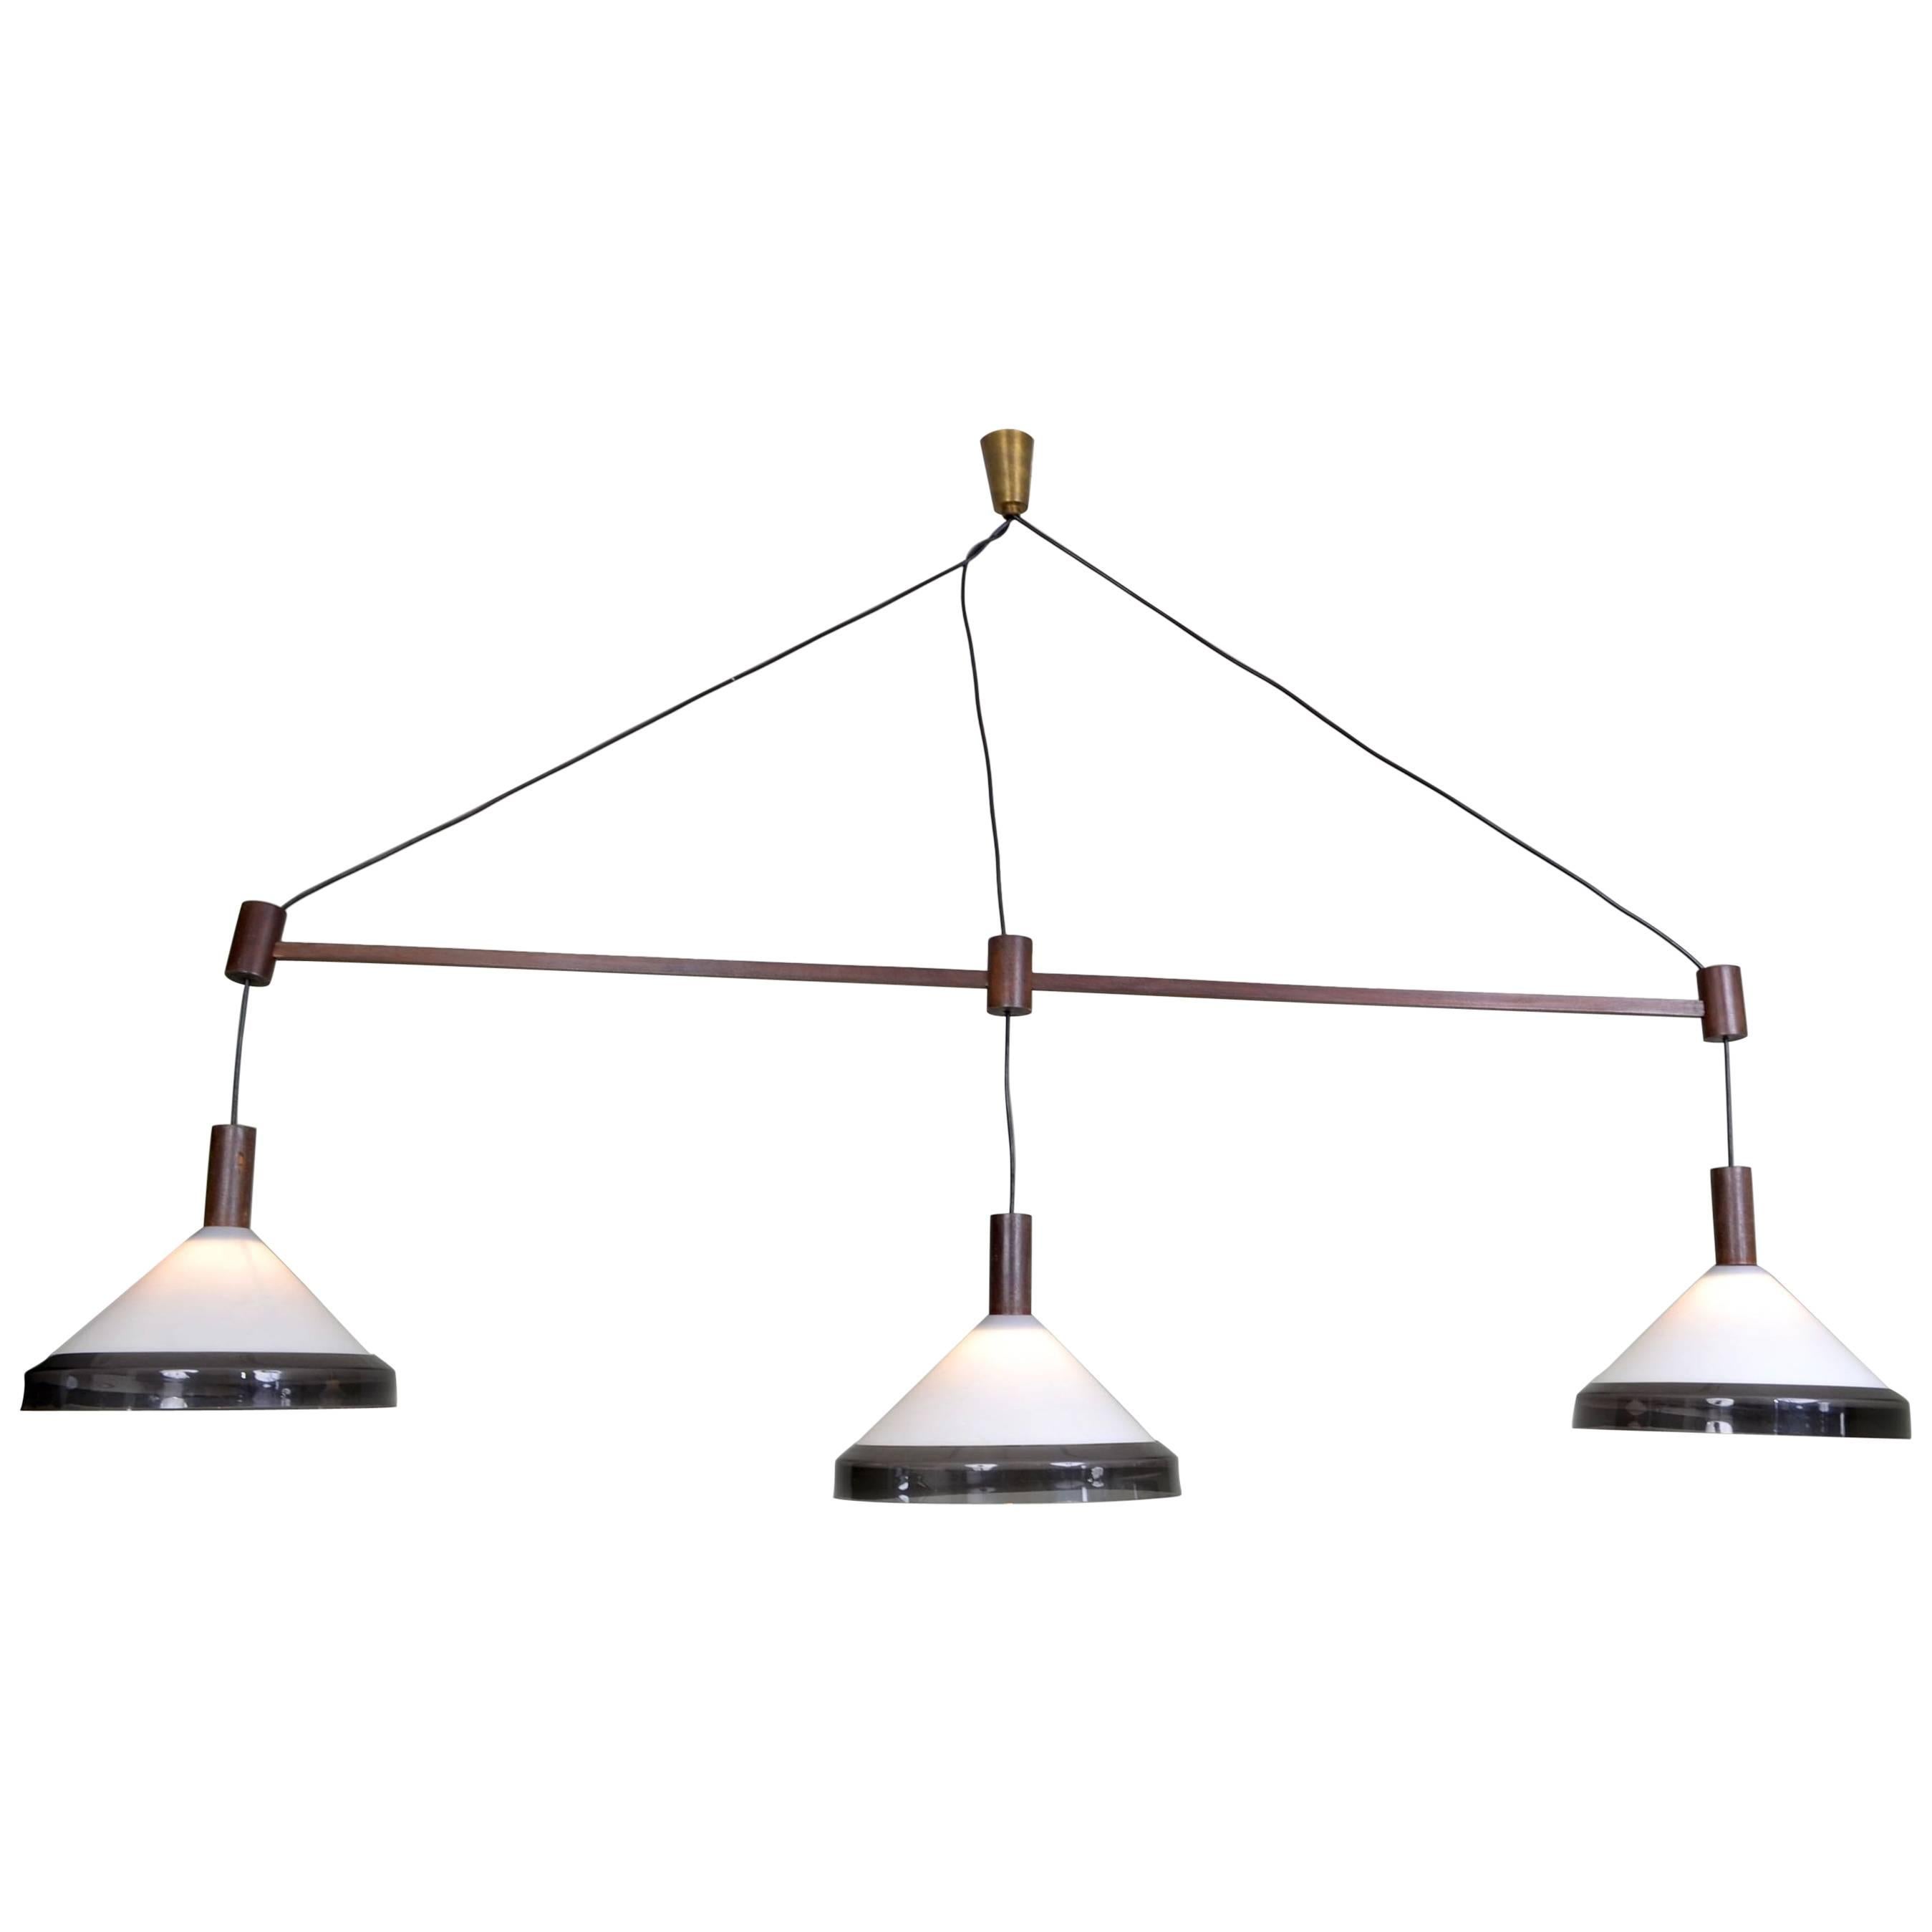 Architectural Three-Light Ceiling Pendant, Italy, circa 1960 For Sale